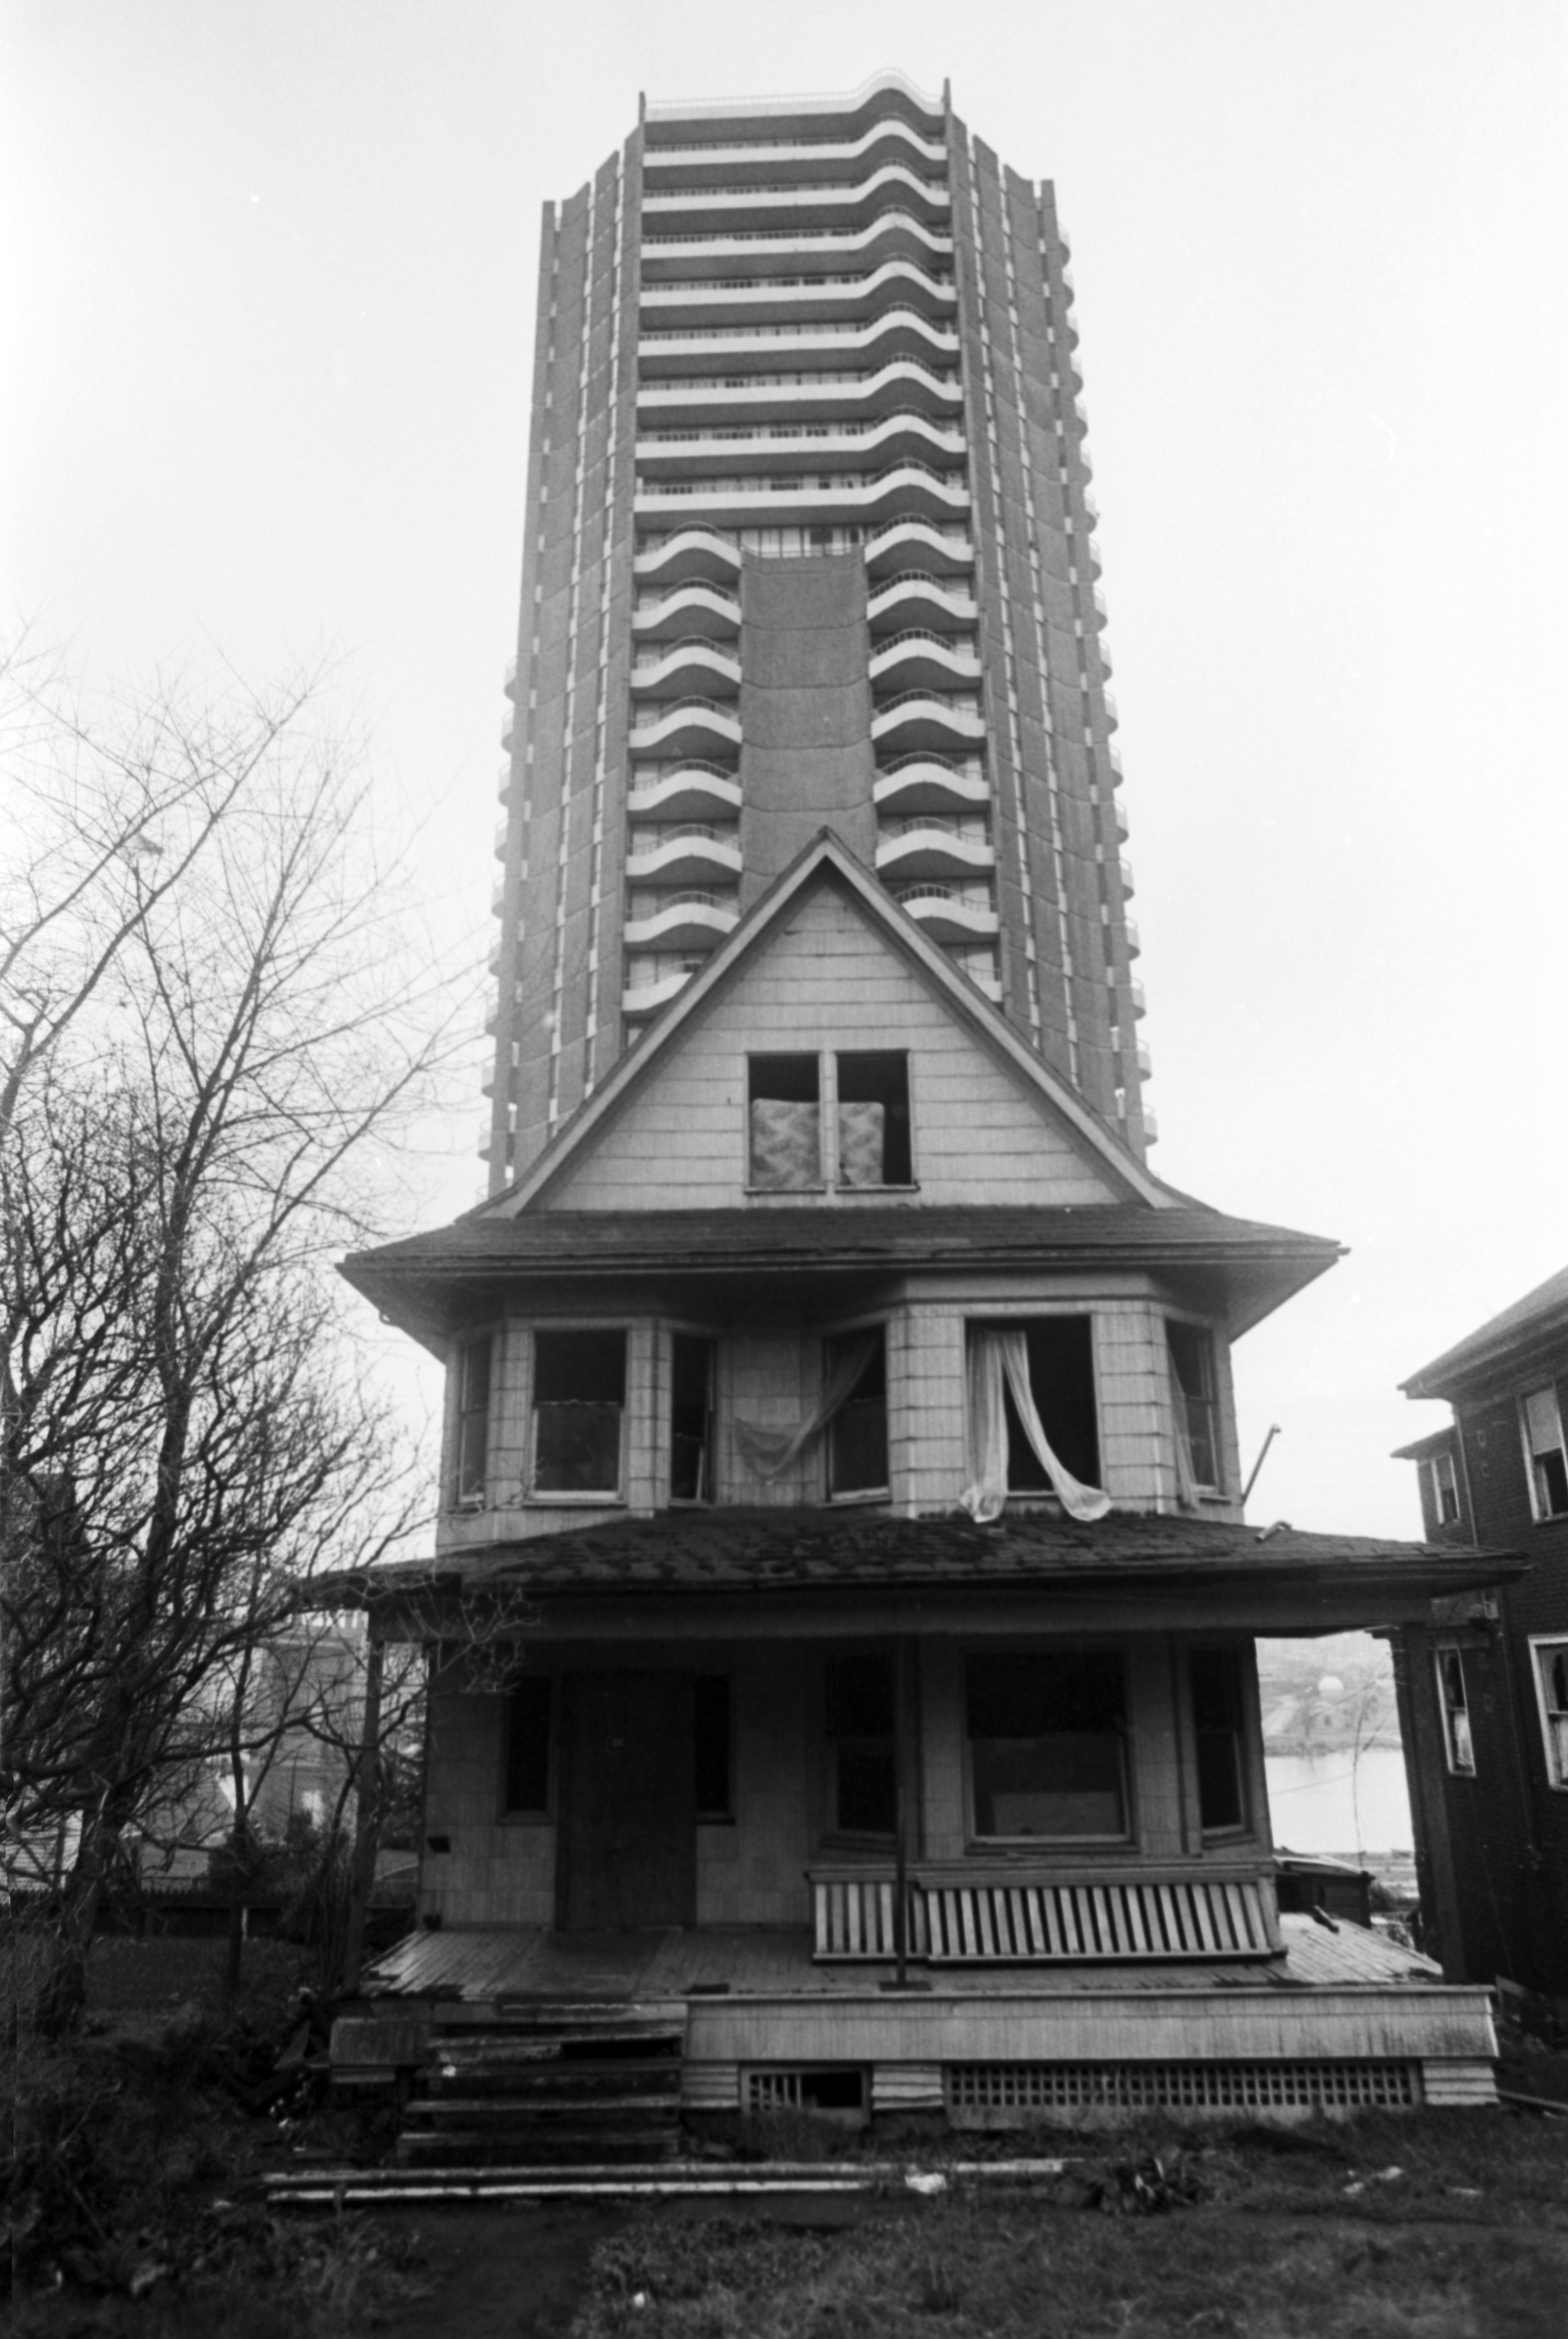 An old home on Pacific Street near Thurlow with high-rise apartment building behind. December 28, 1979. George Diack/Vancouver Sun (79-2149)